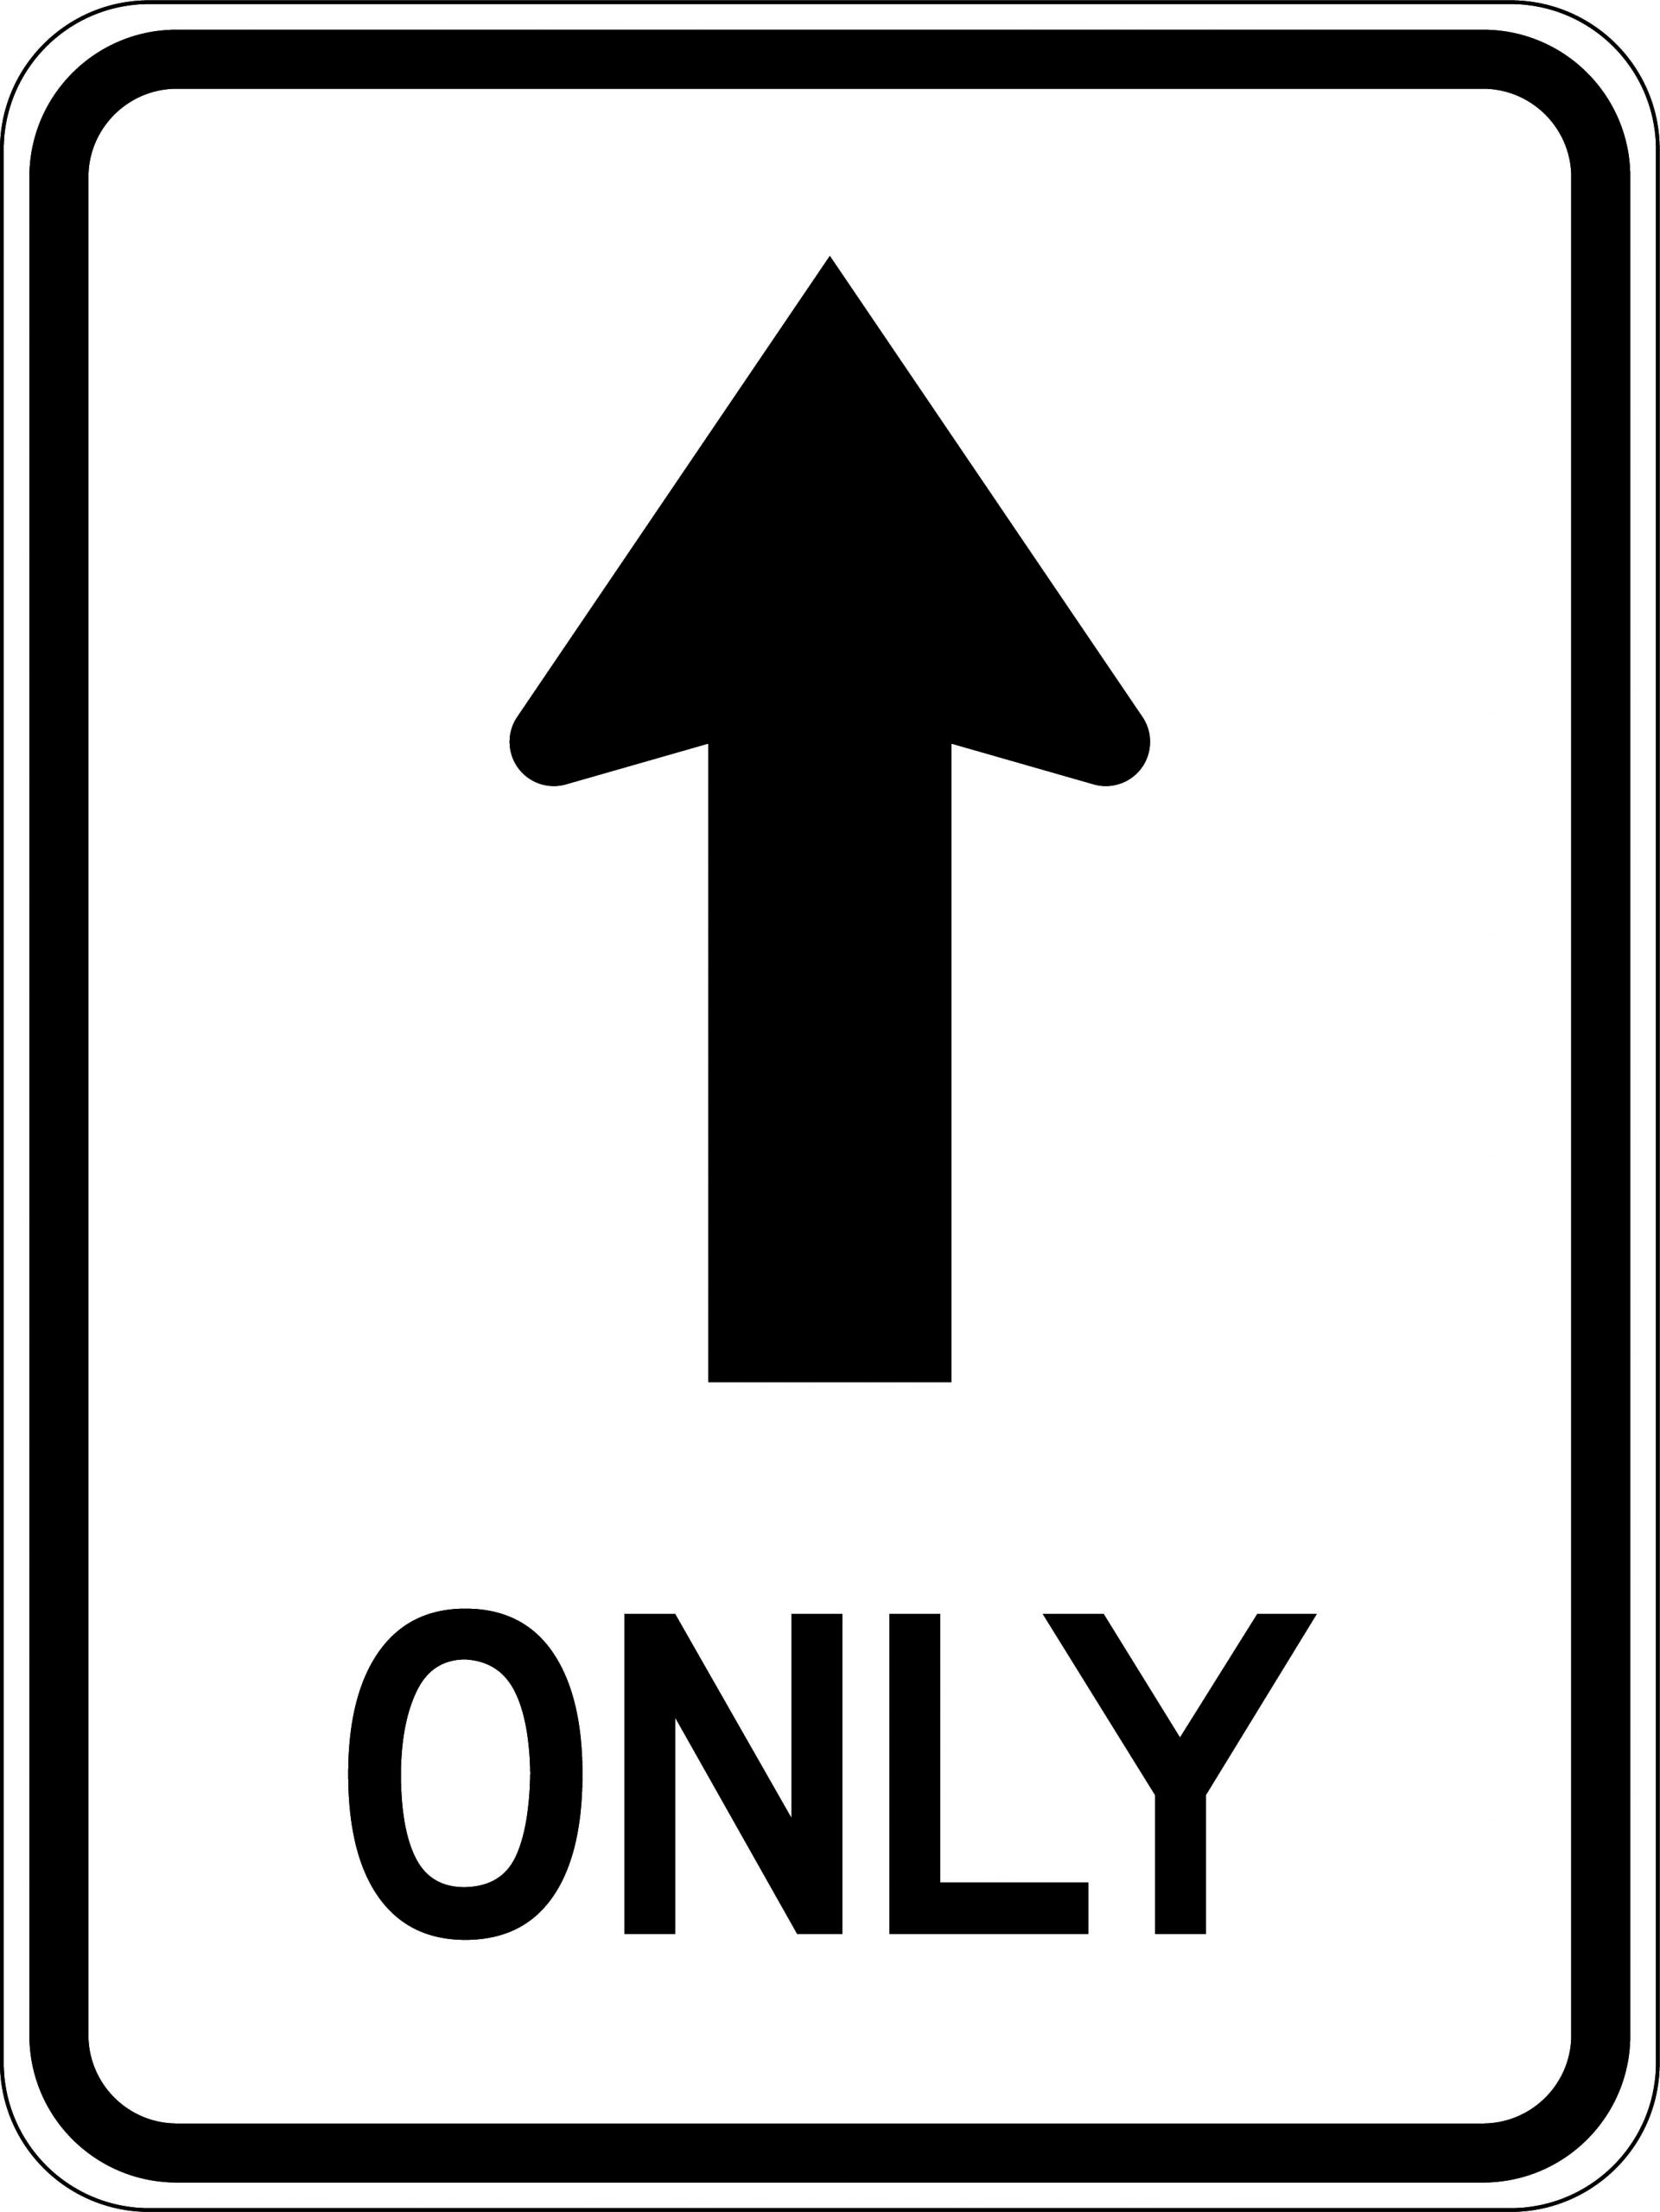 One Way Traffic (Arrow Symbol) Only | Road Signs | USS